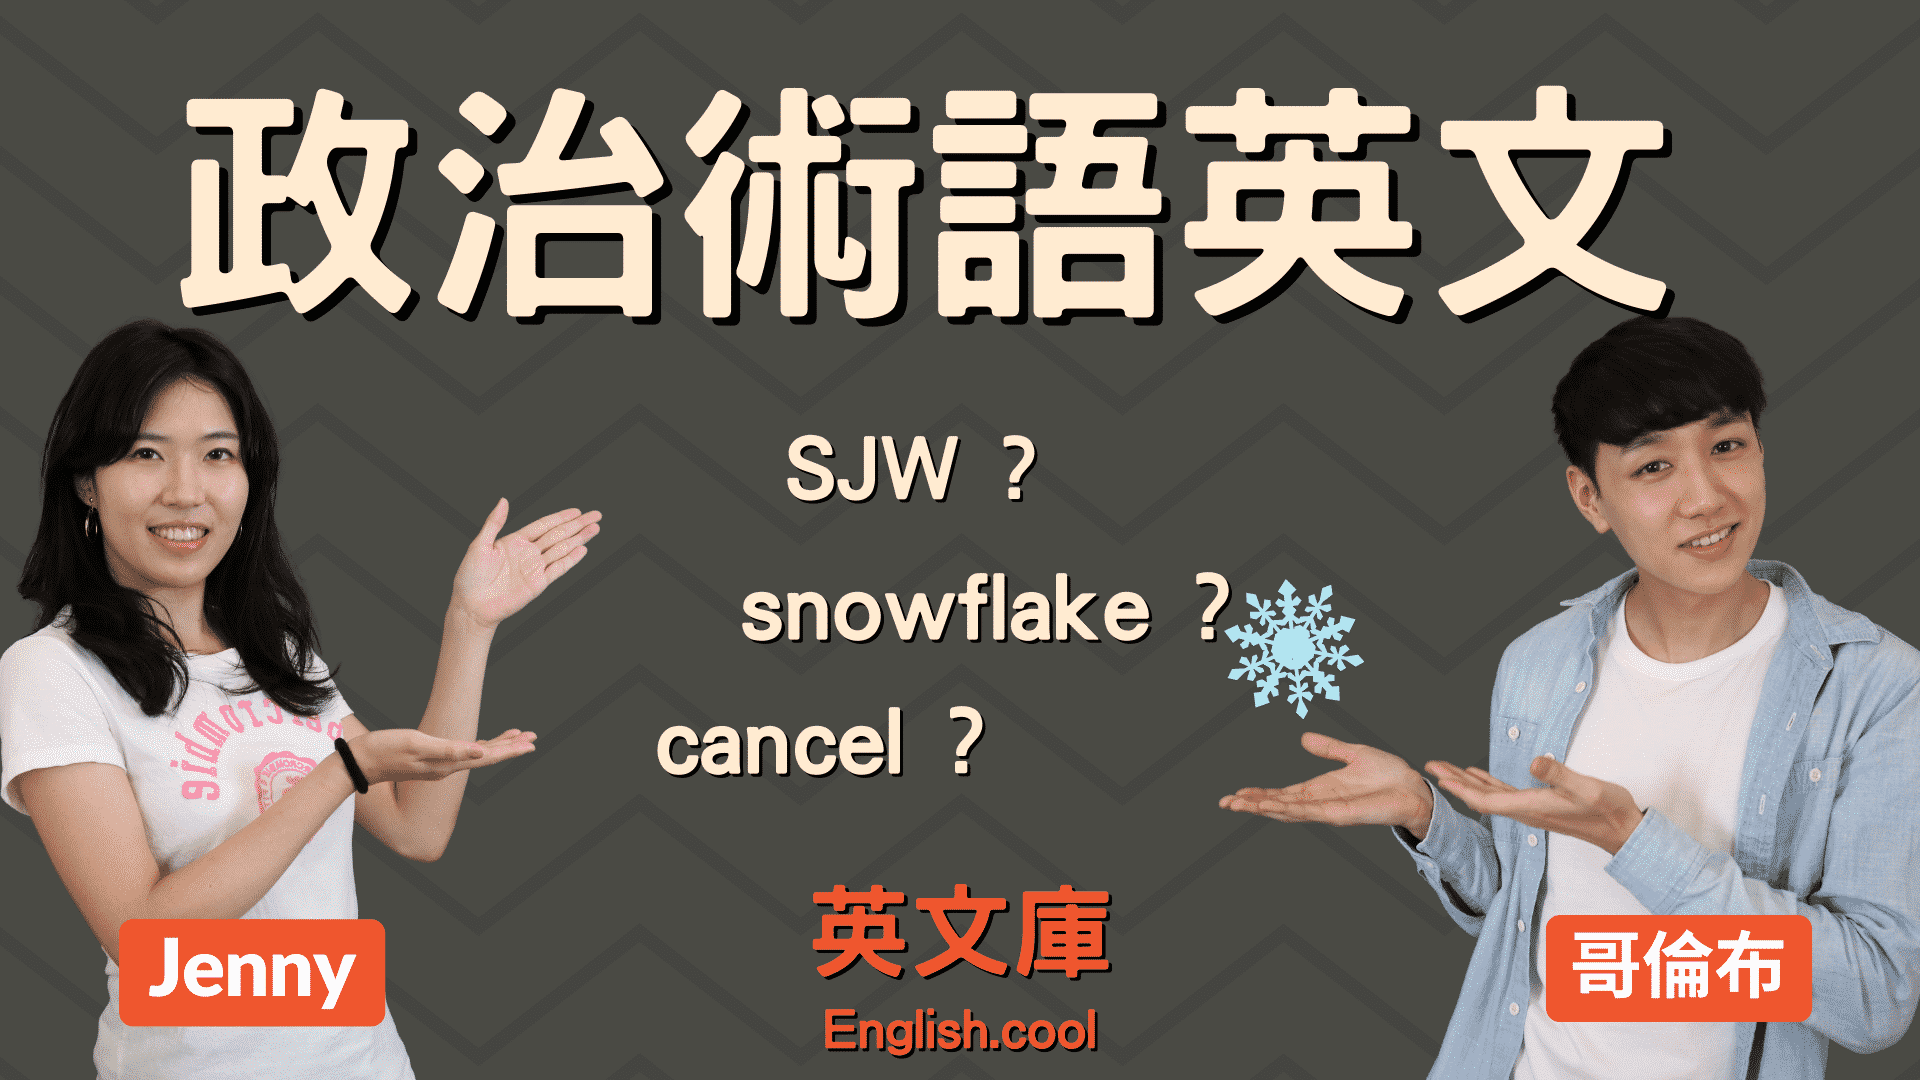 You are currently viewing 【政治術語英文】SJW, Snowflake等是什麼意思？